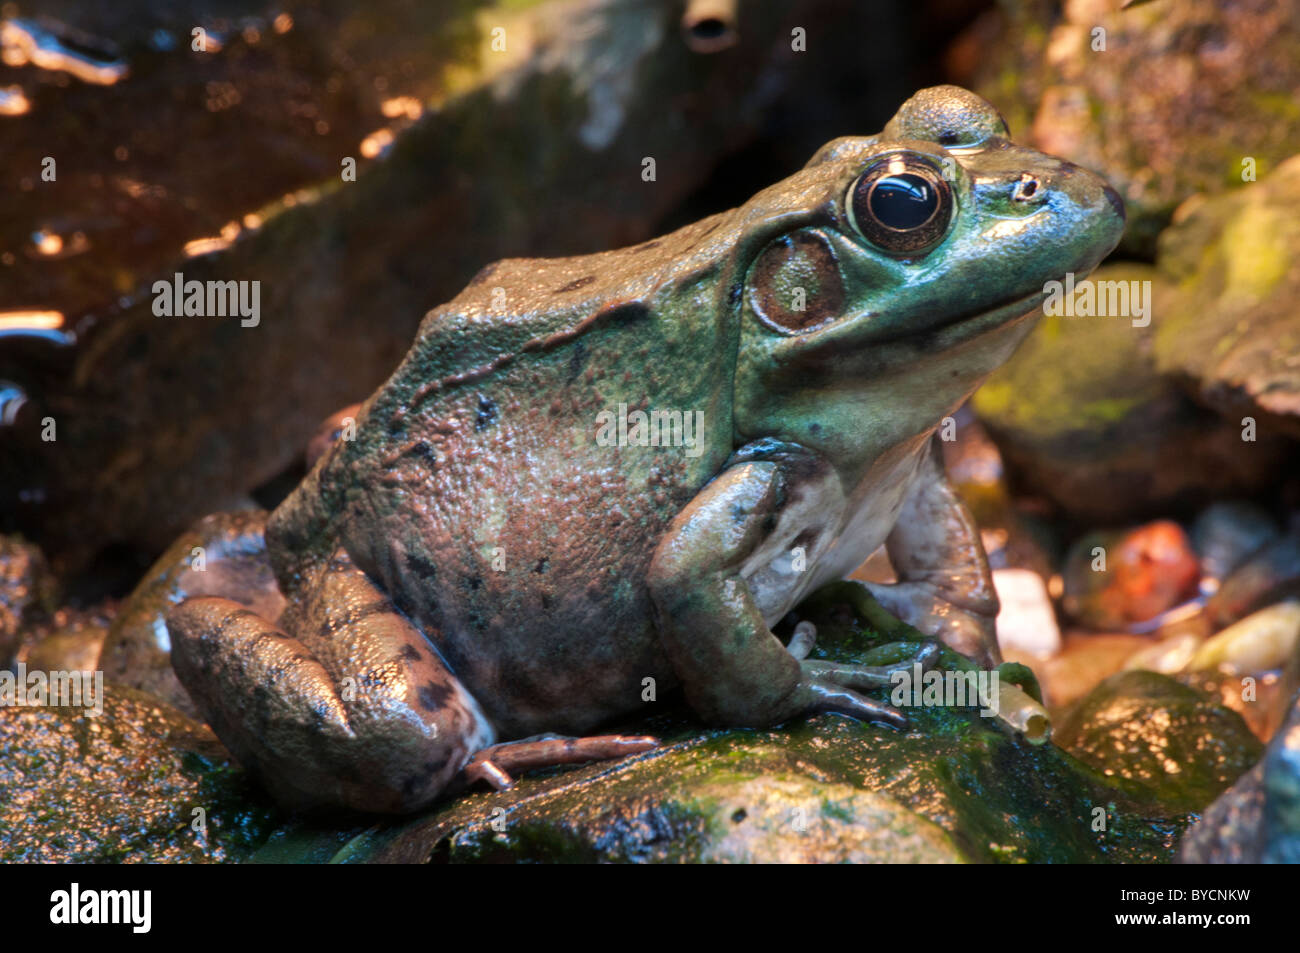 Close-up of a Green Frog Stock Photo